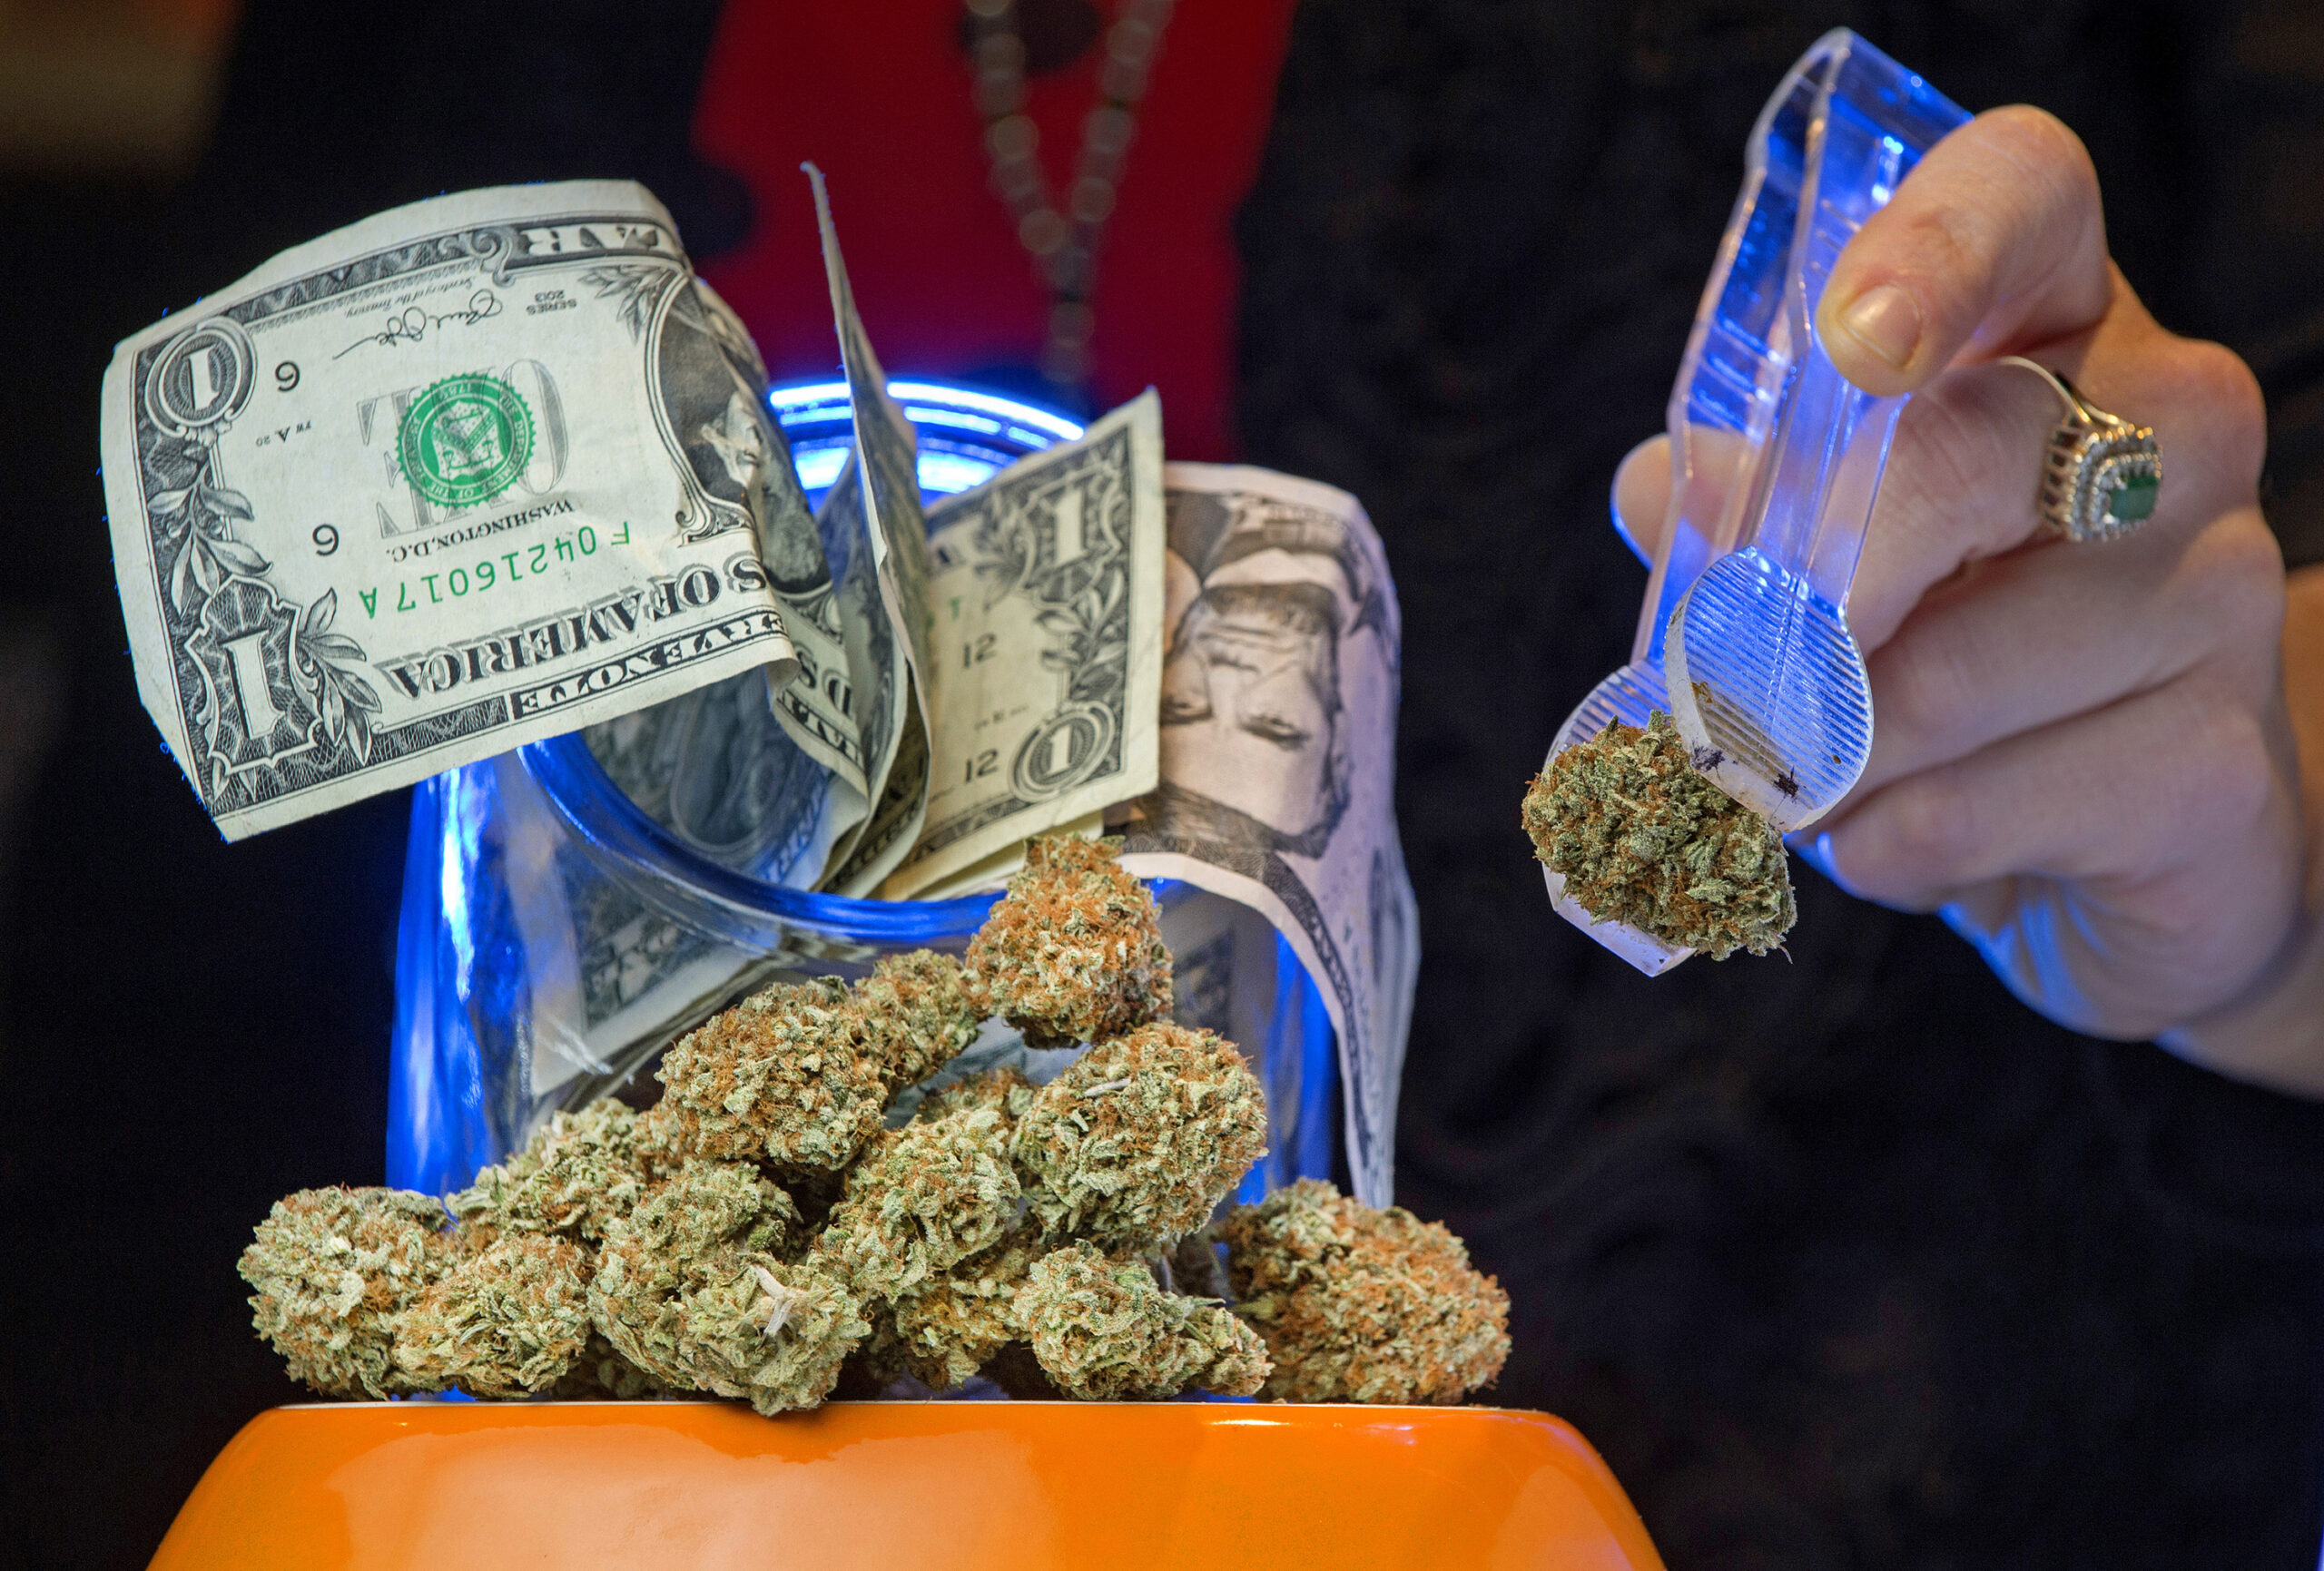 Though other ways to purchase are coming most of the transactions for purchasing pot in March at the OC3 Dispensary in Santa Ana was with cash. (Michael Goulding/Orange County Register/TNS)